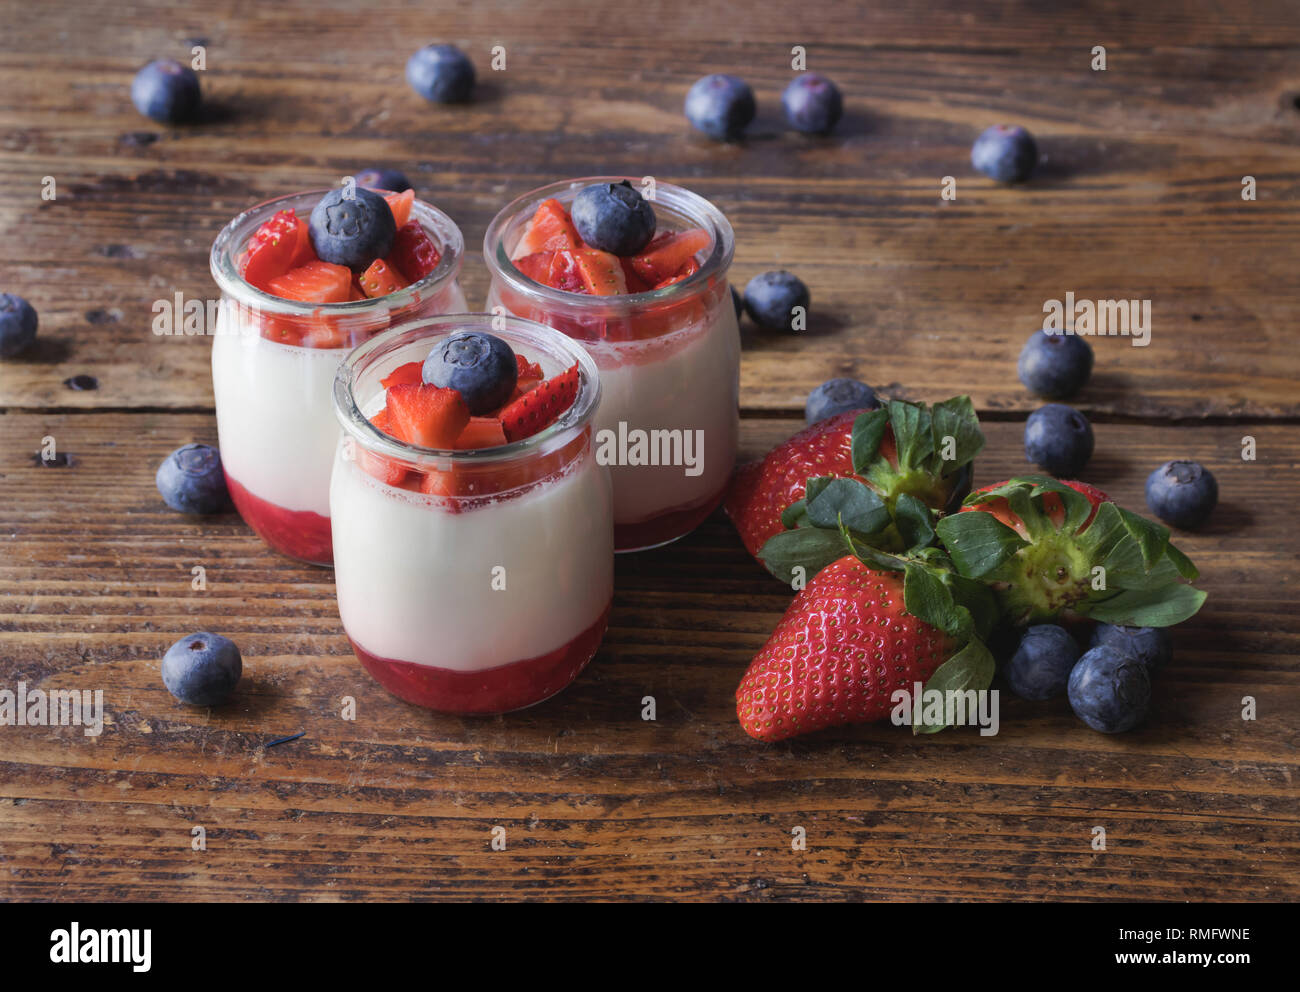 Delicious homemade yogurt with strawberry jam and sliced strawberries and blueberries, on a wooden board Stock Photo